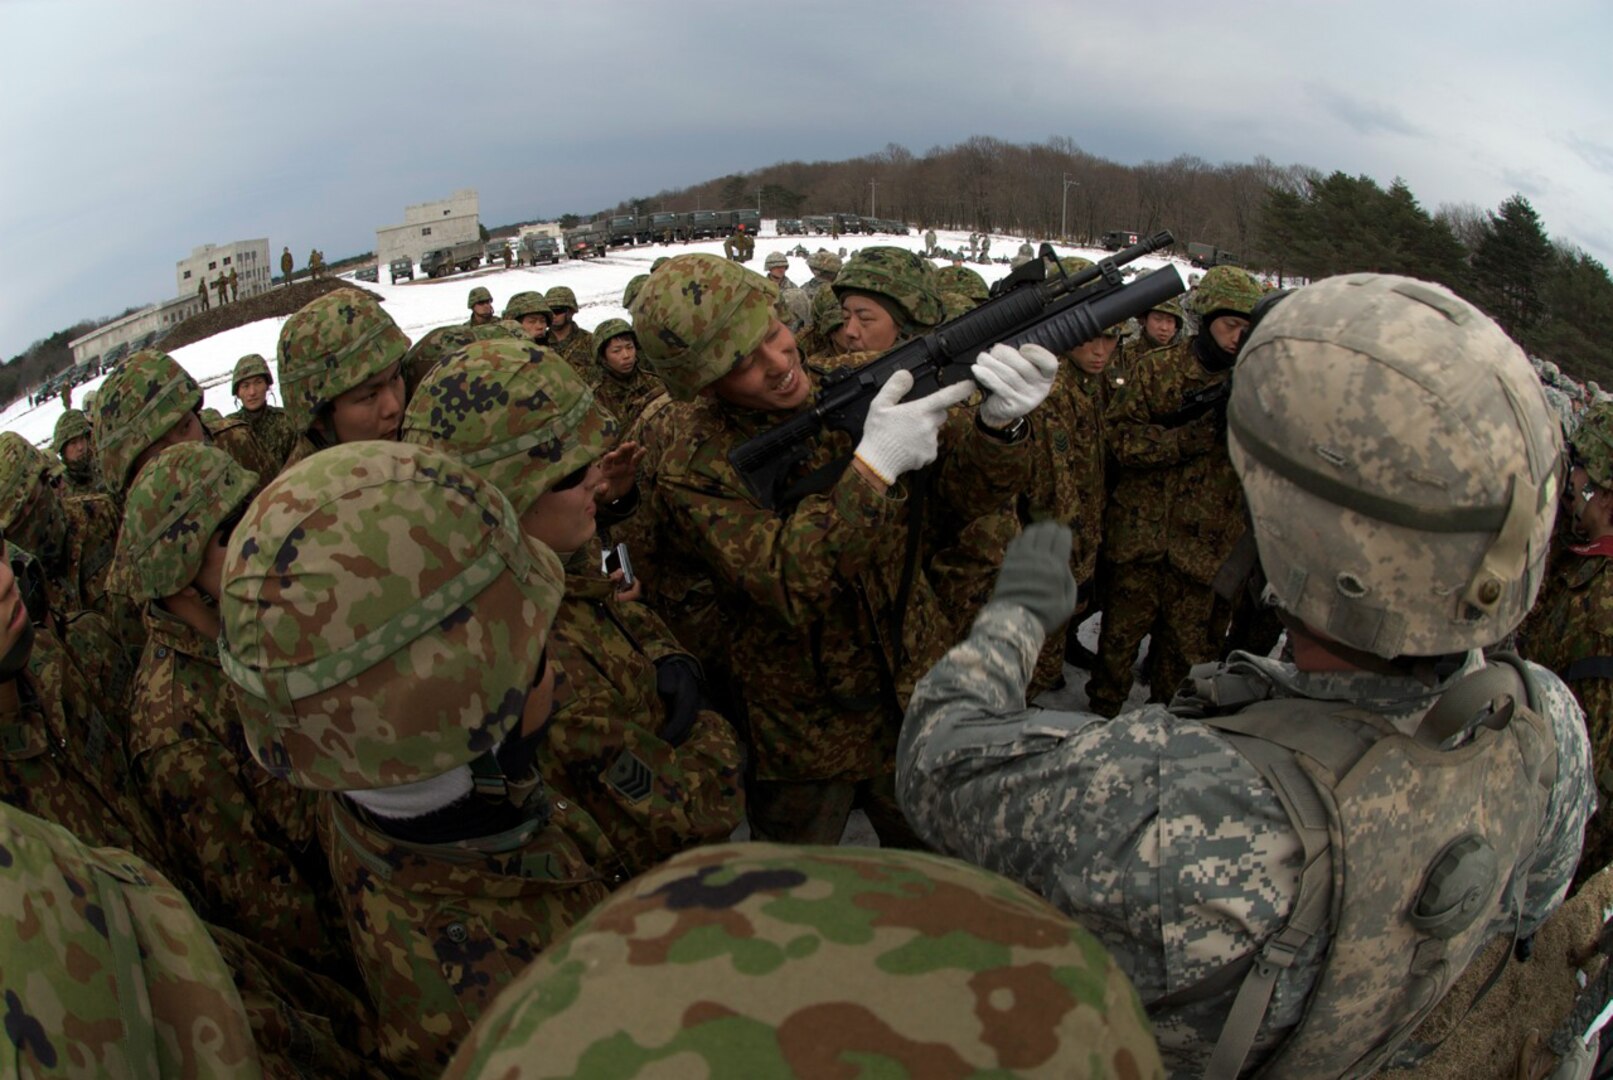 South Carolina Army National Guard infantryman instruct Japanese soldiers on the use and technical characteristics of the M-203 grenade launcher at one of the firing ranges located on Ojojibara Maneuver Area in Sendai, Japan, on Feb. 11, 2010. The practical demonstration was part of FTX North Wind 2010.